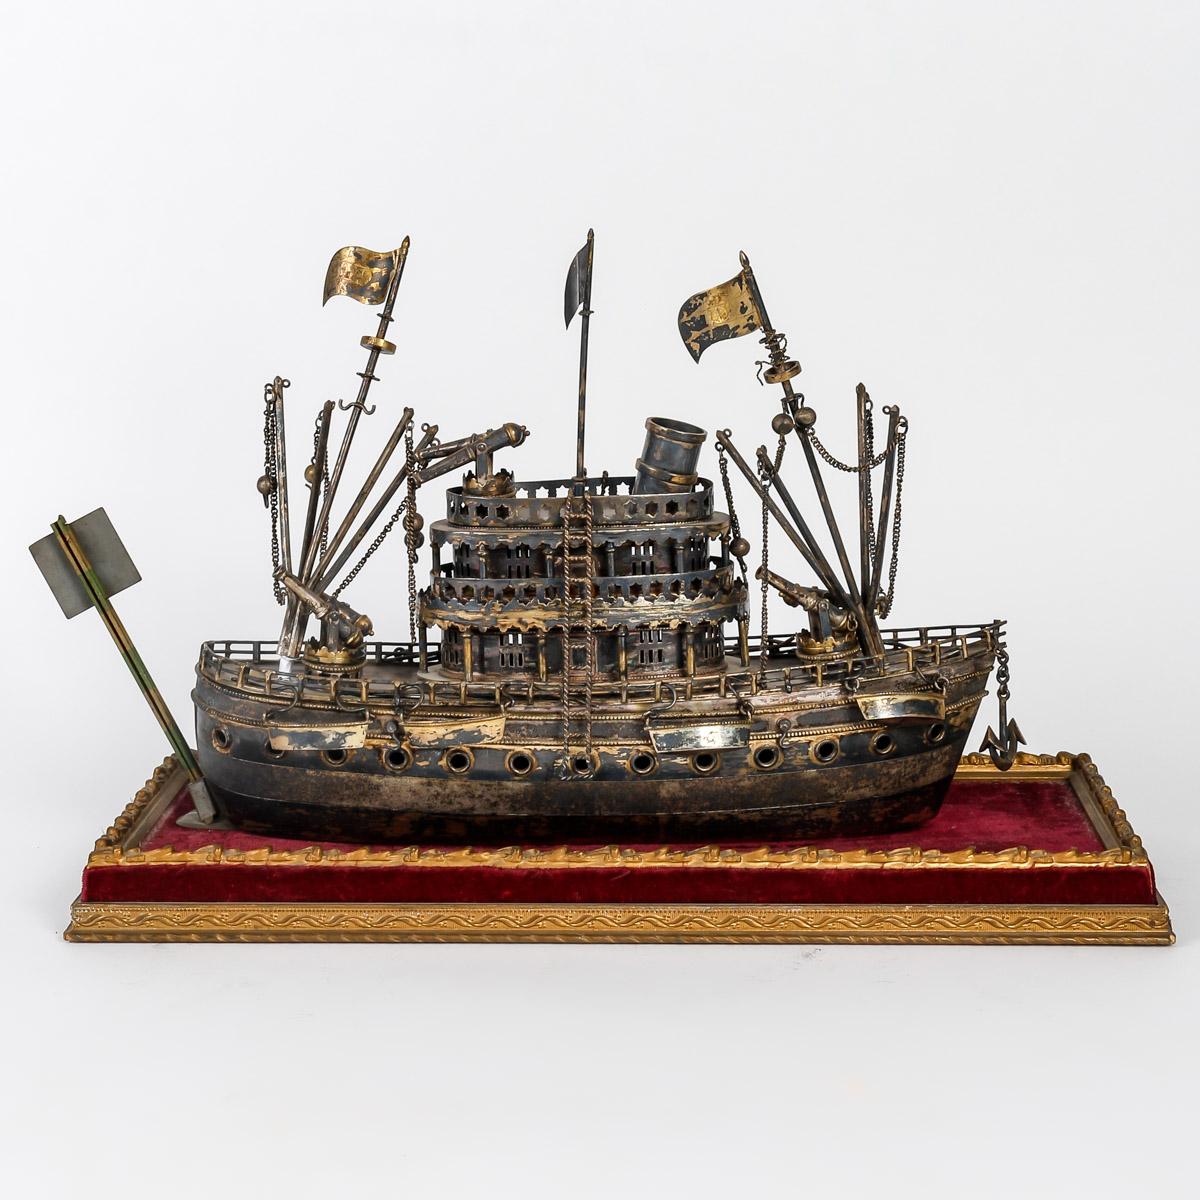 Napoleon III Miniature Army Boat in Sterling Silver, 19th Century, English Work.